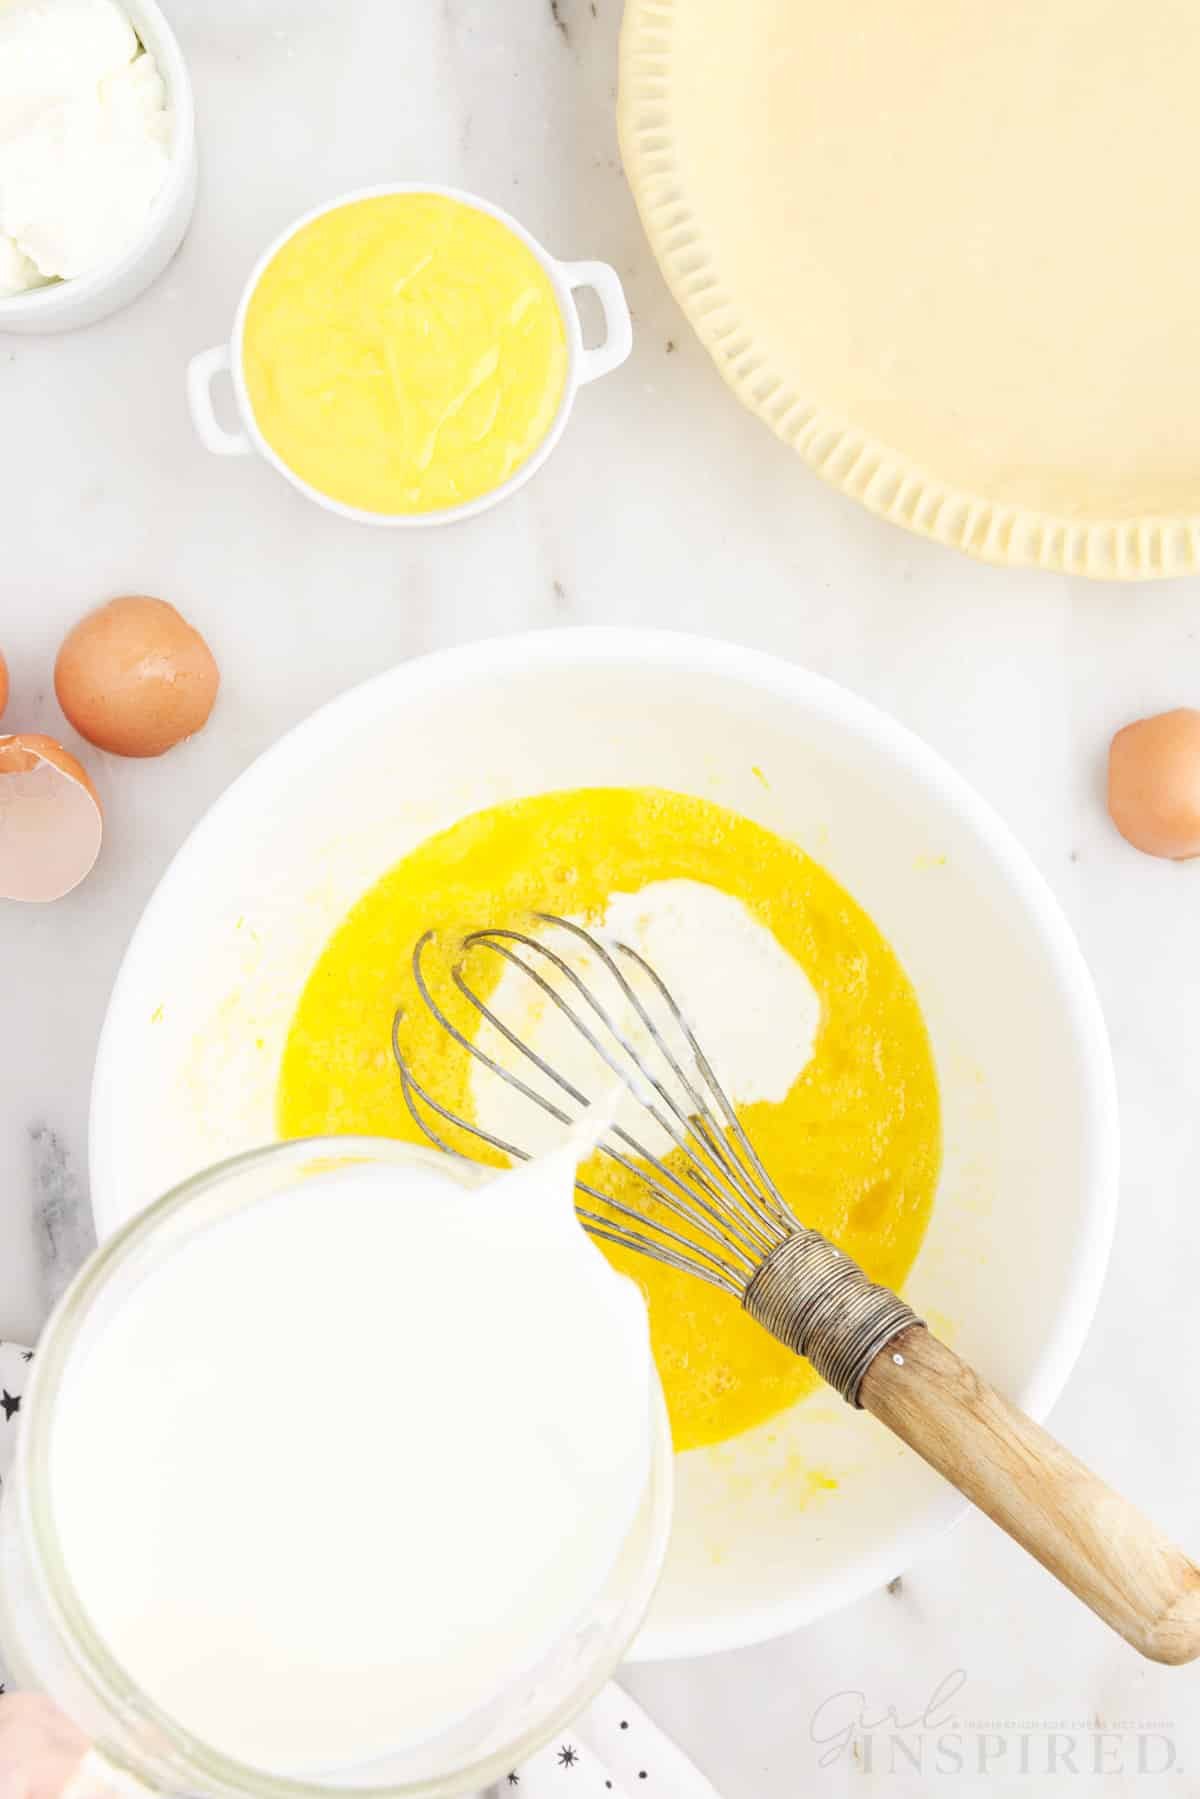 Milk added to egg mixture with a whisk inserted next to the pie crust for lemon custard pie.